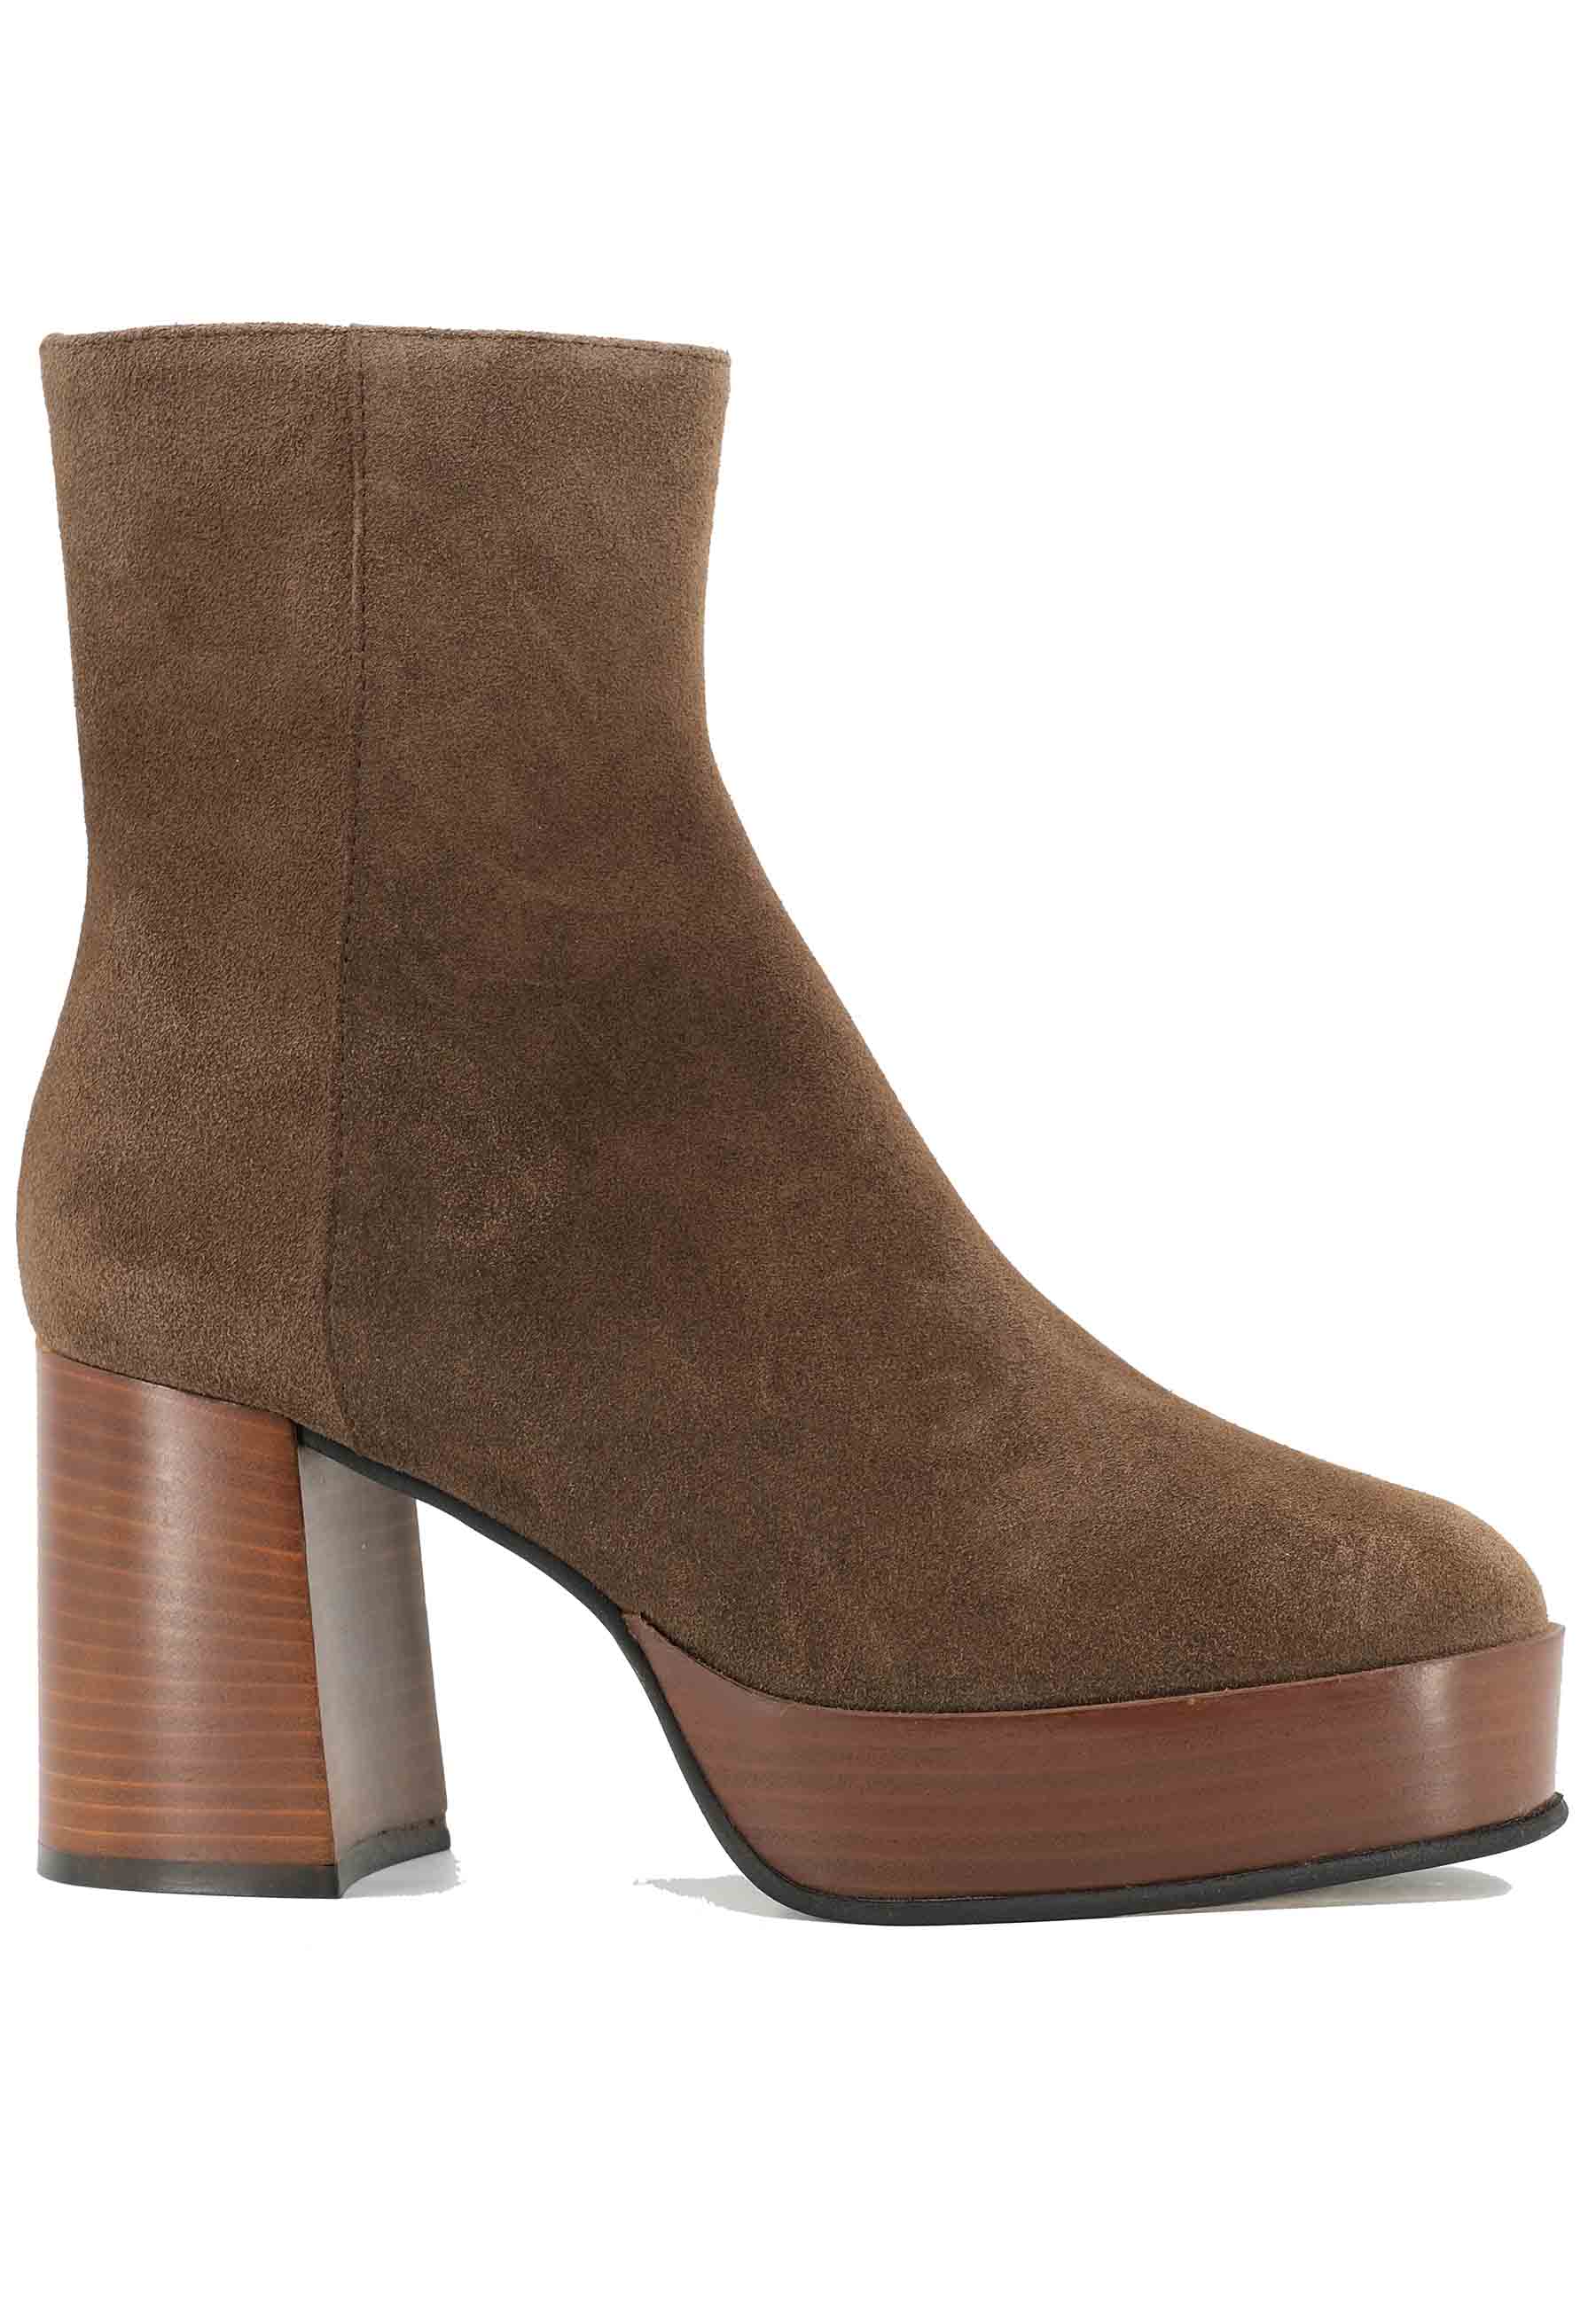 TR1556 taupe suede ankle boots with high heel and platform with side zip closure